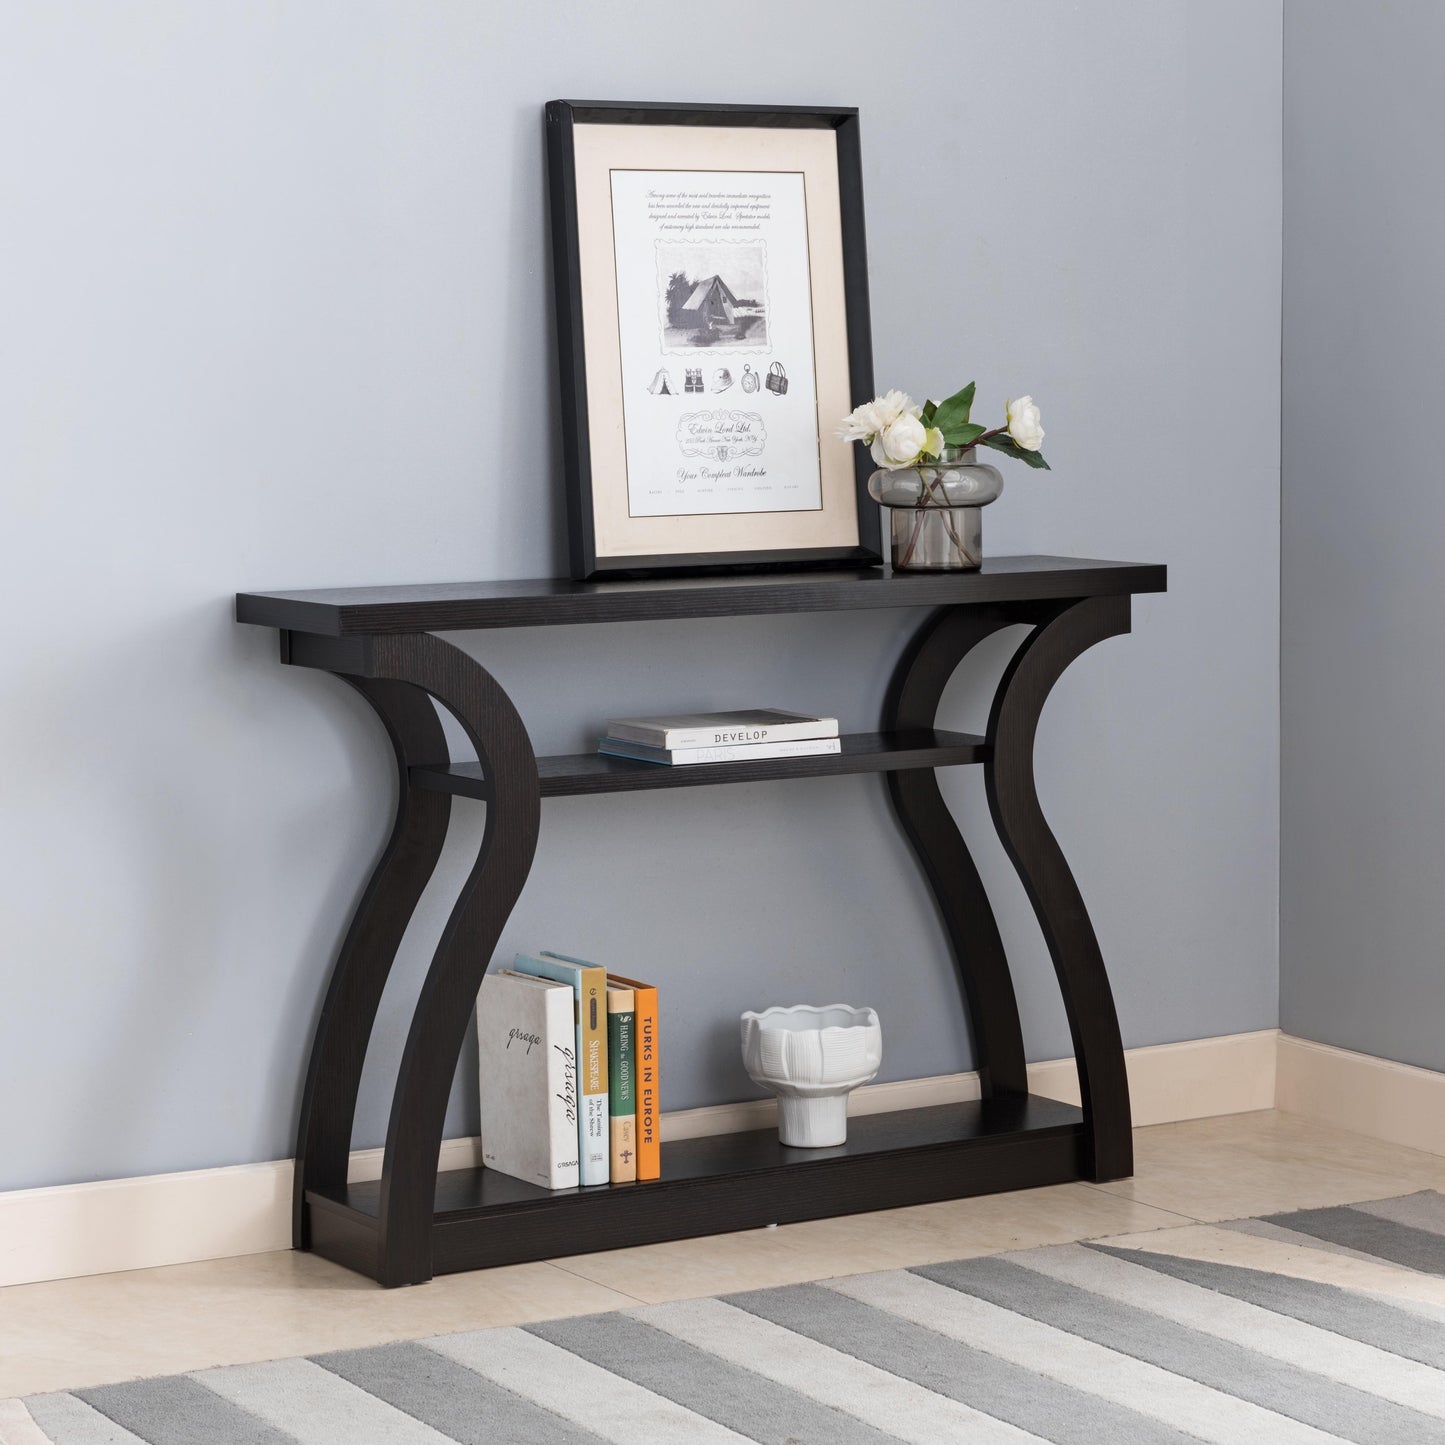 Wood-Carved Sofa Table with Storage Shelves